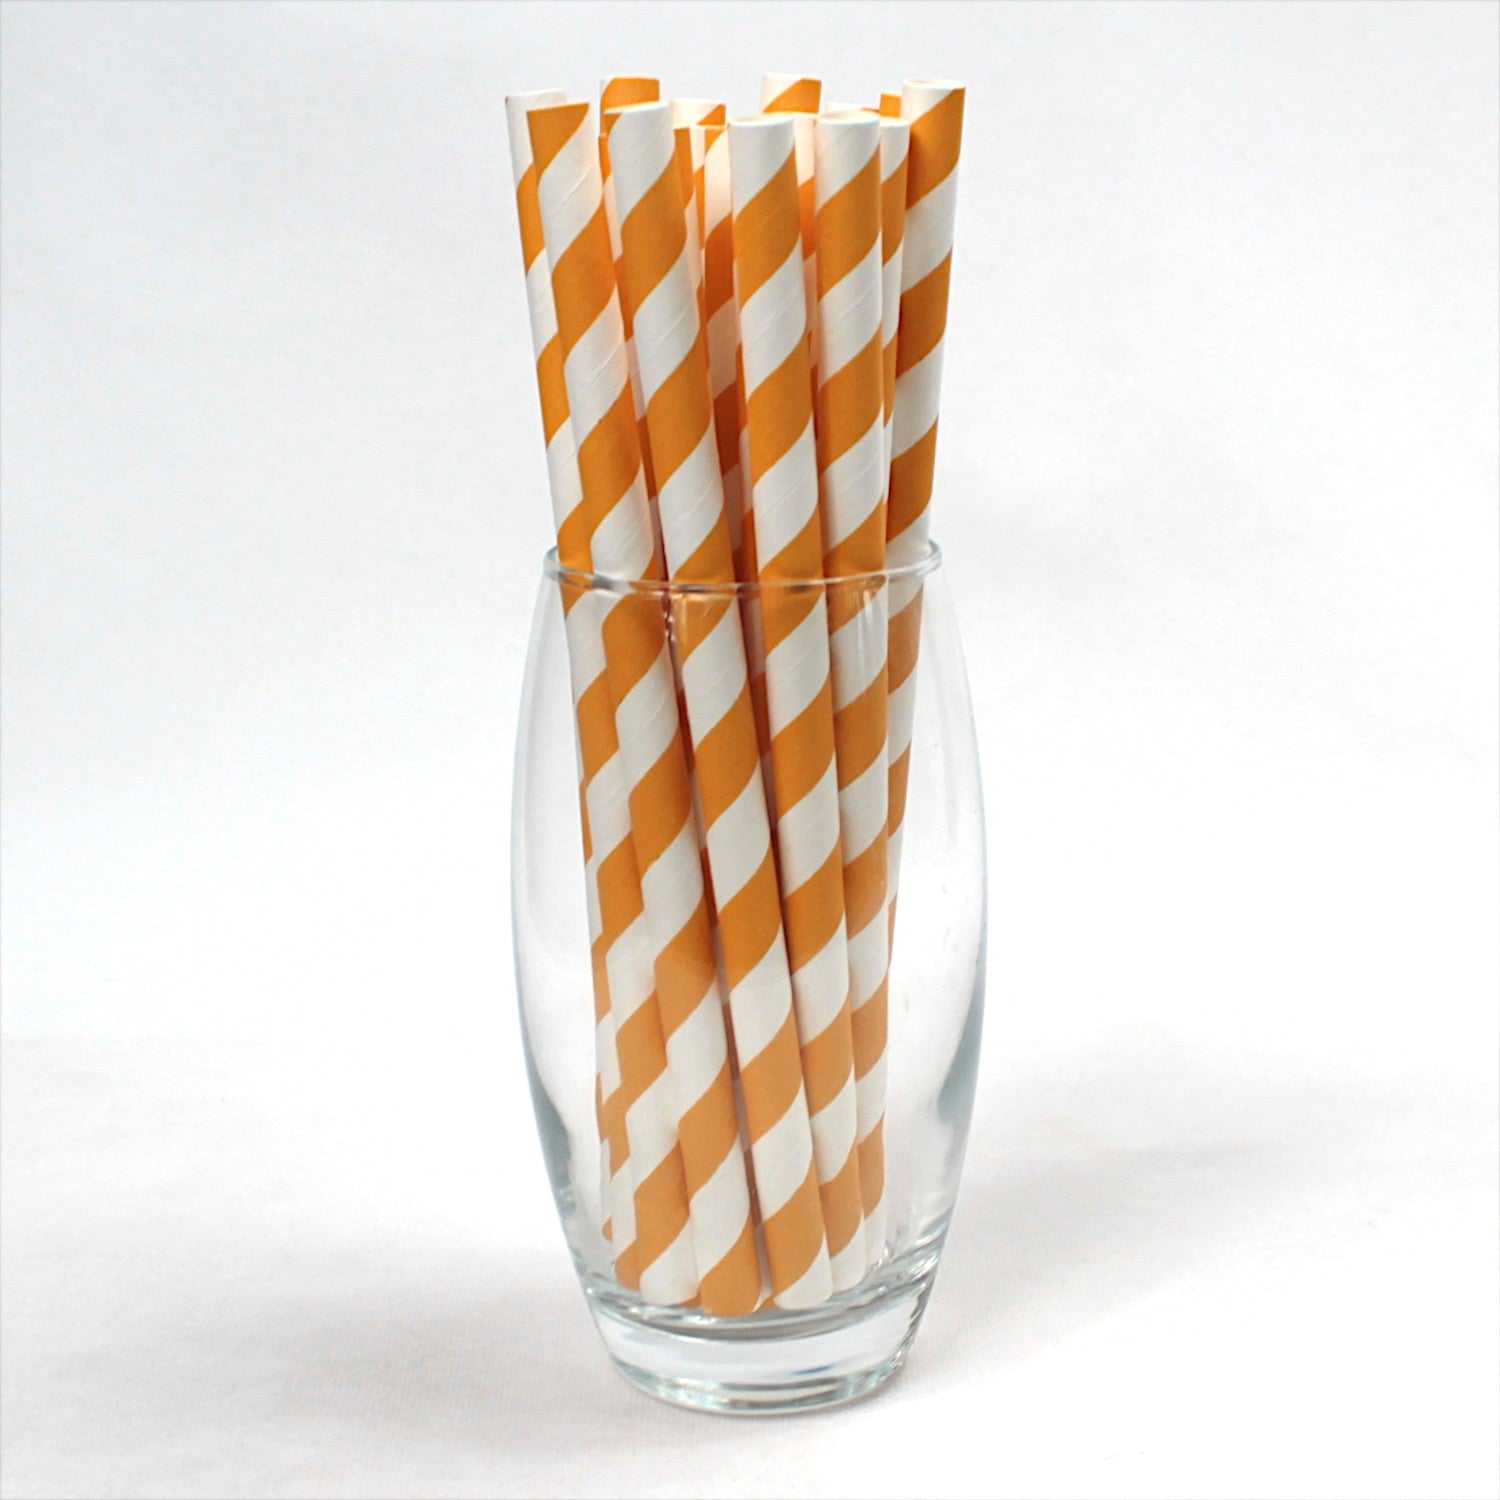 Yellow & White Striped Paper Straws (10mm x 200mm) - Quality Drinking Straws for Smoothies and Milkshakes - Intrinsic Paper Straws